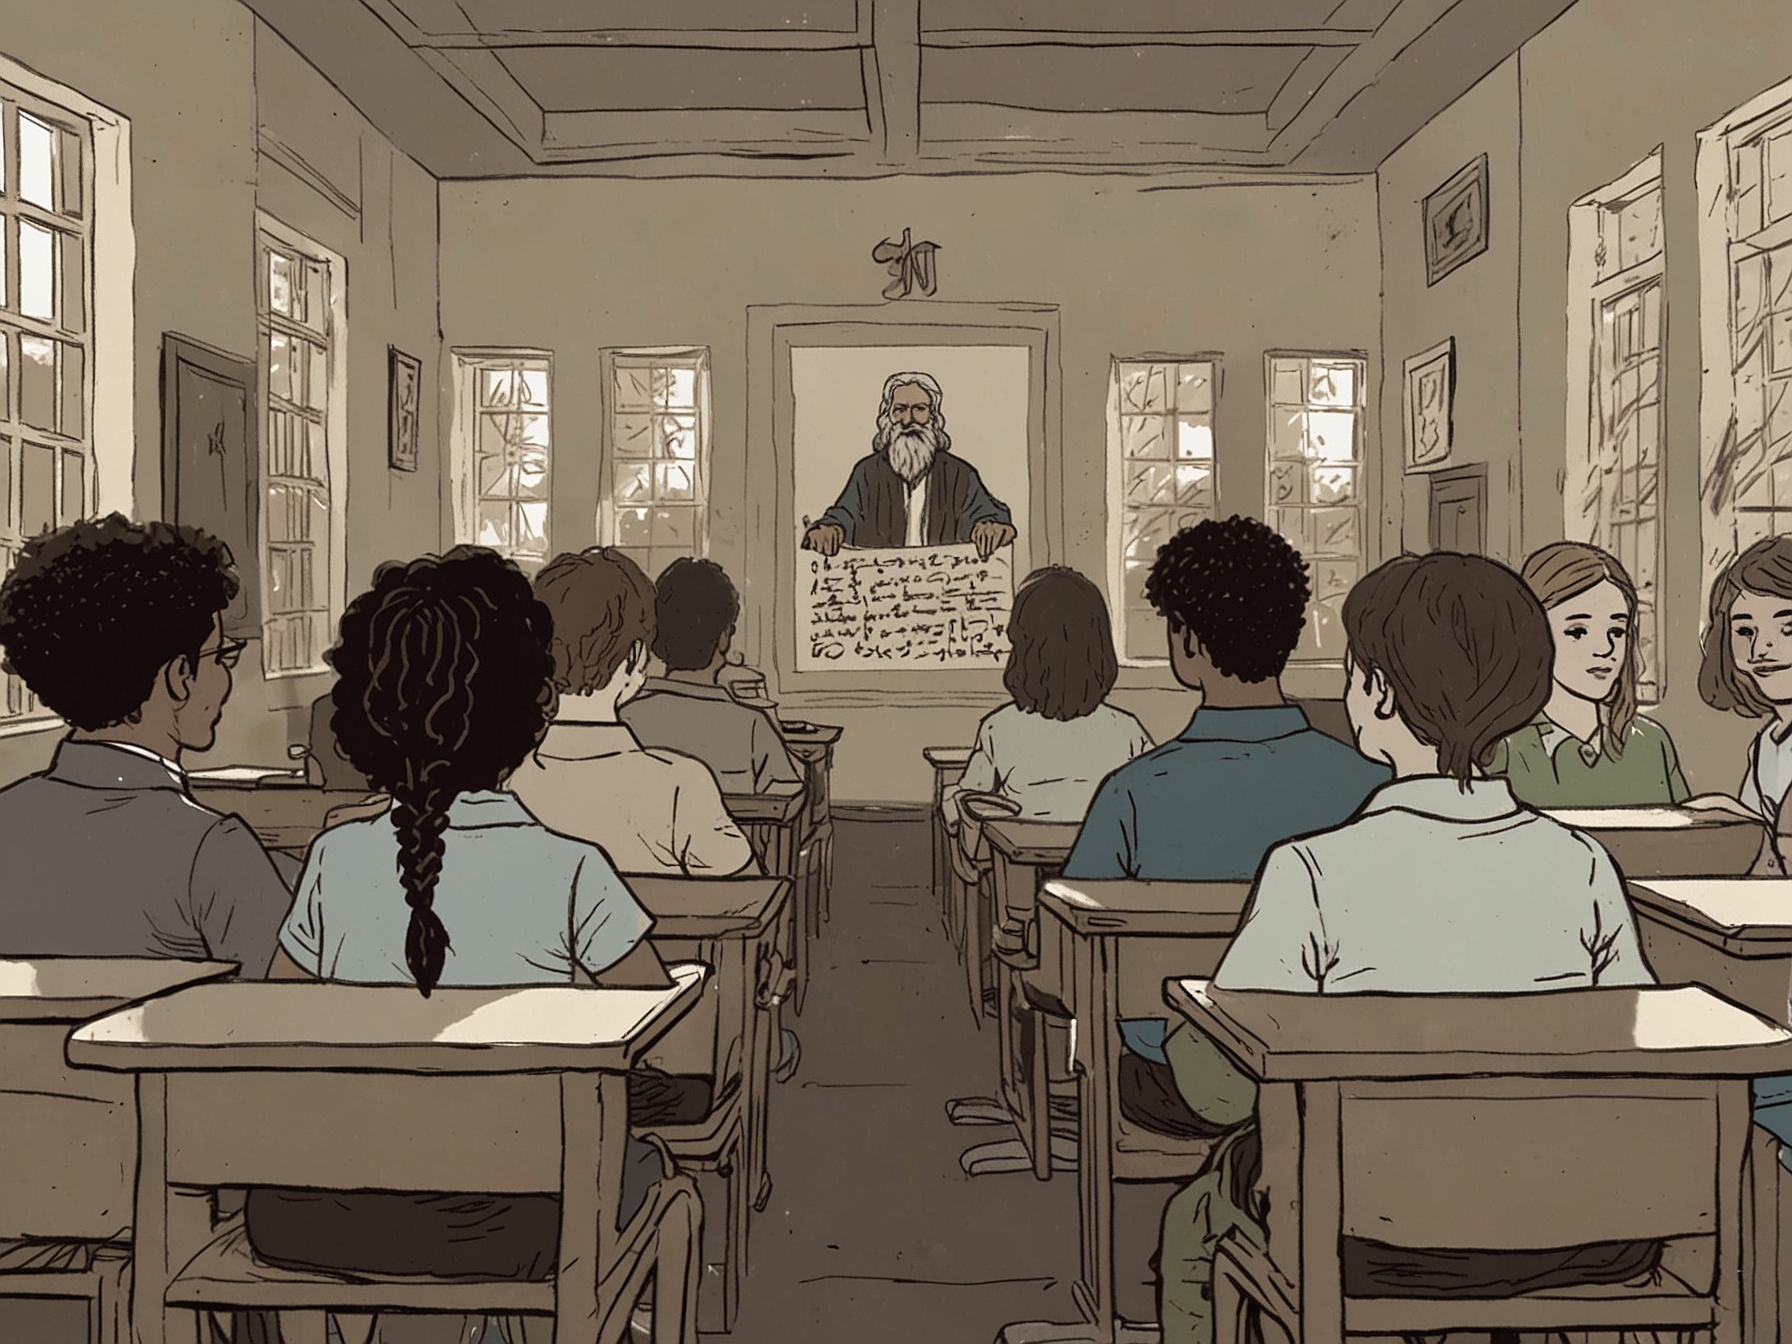 A diverse group of students in a classroom, with Ten Commandments displayed on the wall, illustrating the debate on integrating religious teachings into public education.